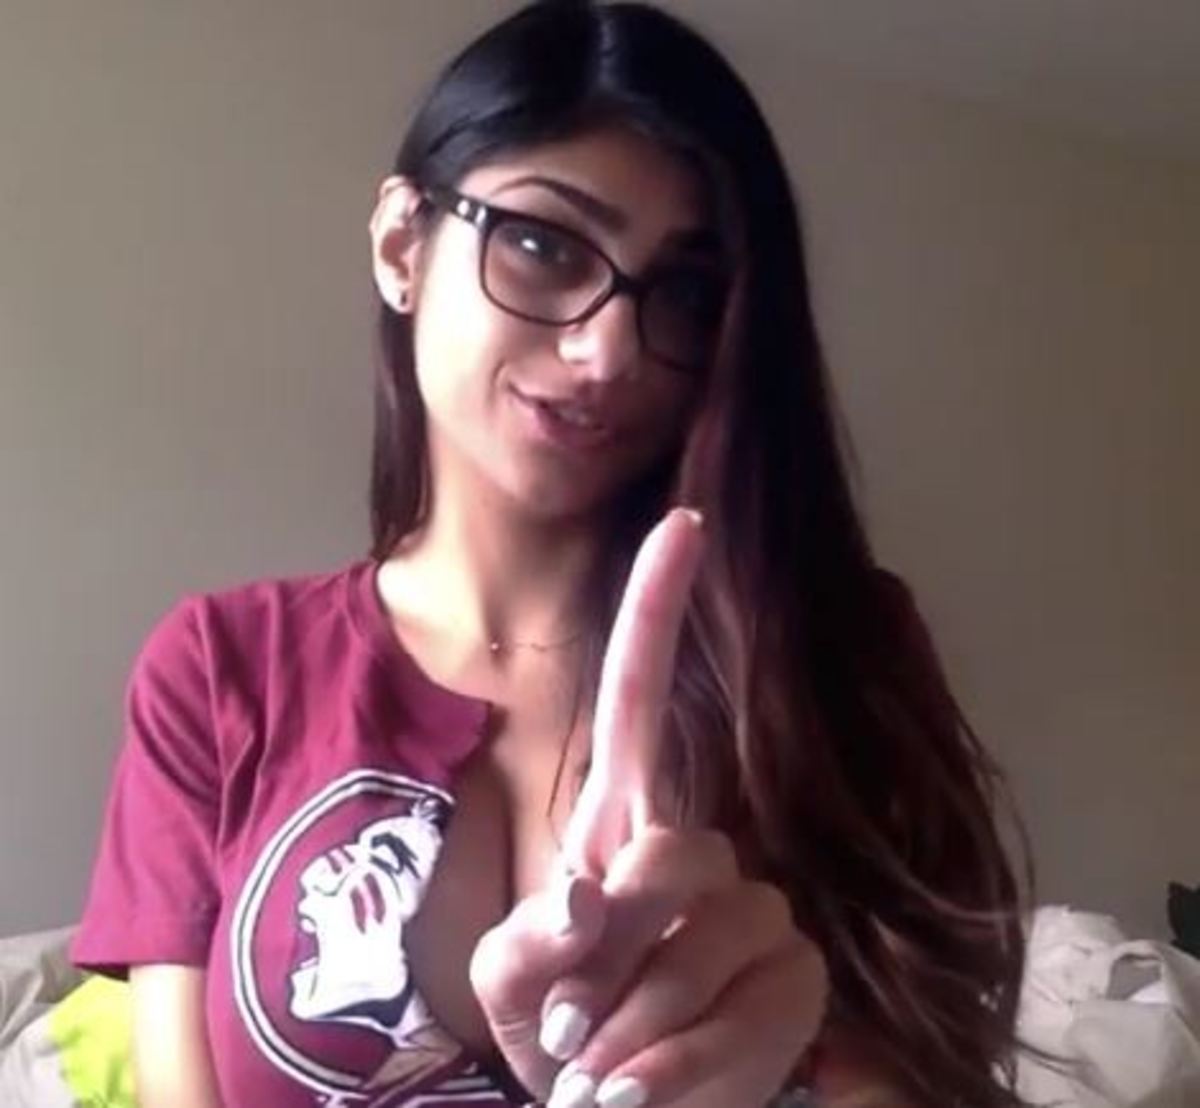 Adult film actress and Florida State fan Mia Khalifa records a video about why Braxton Miller should transfer and play for the Seminoles.